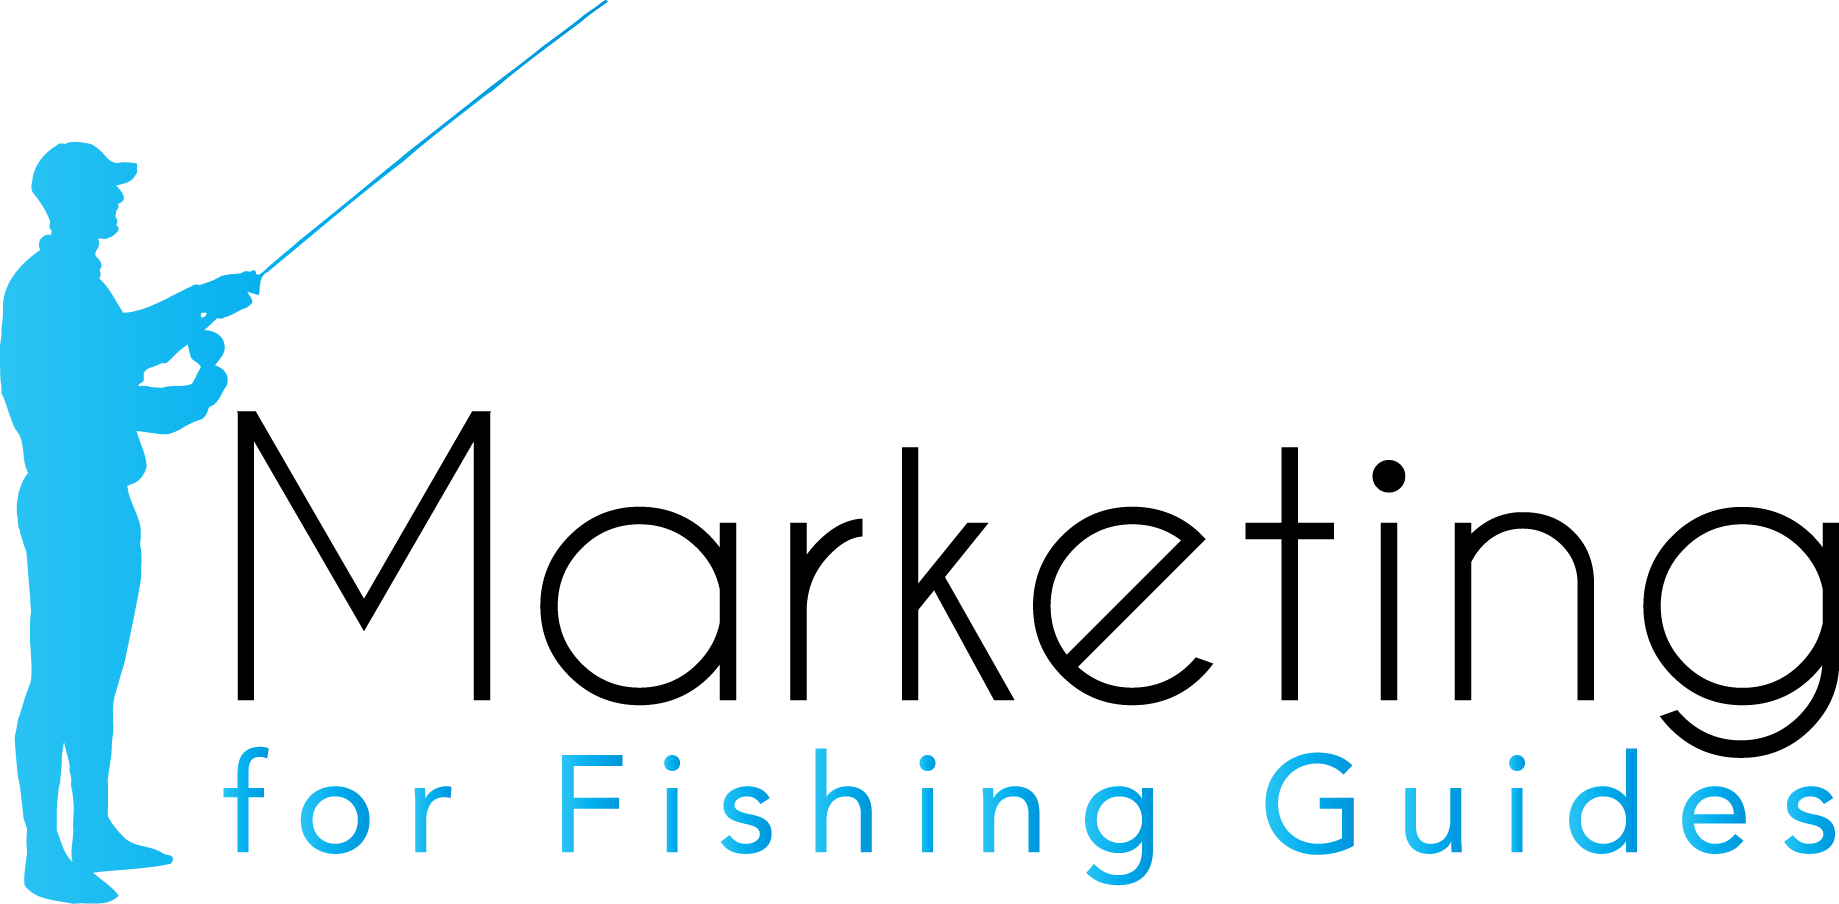 Marketing for Fishing Guides